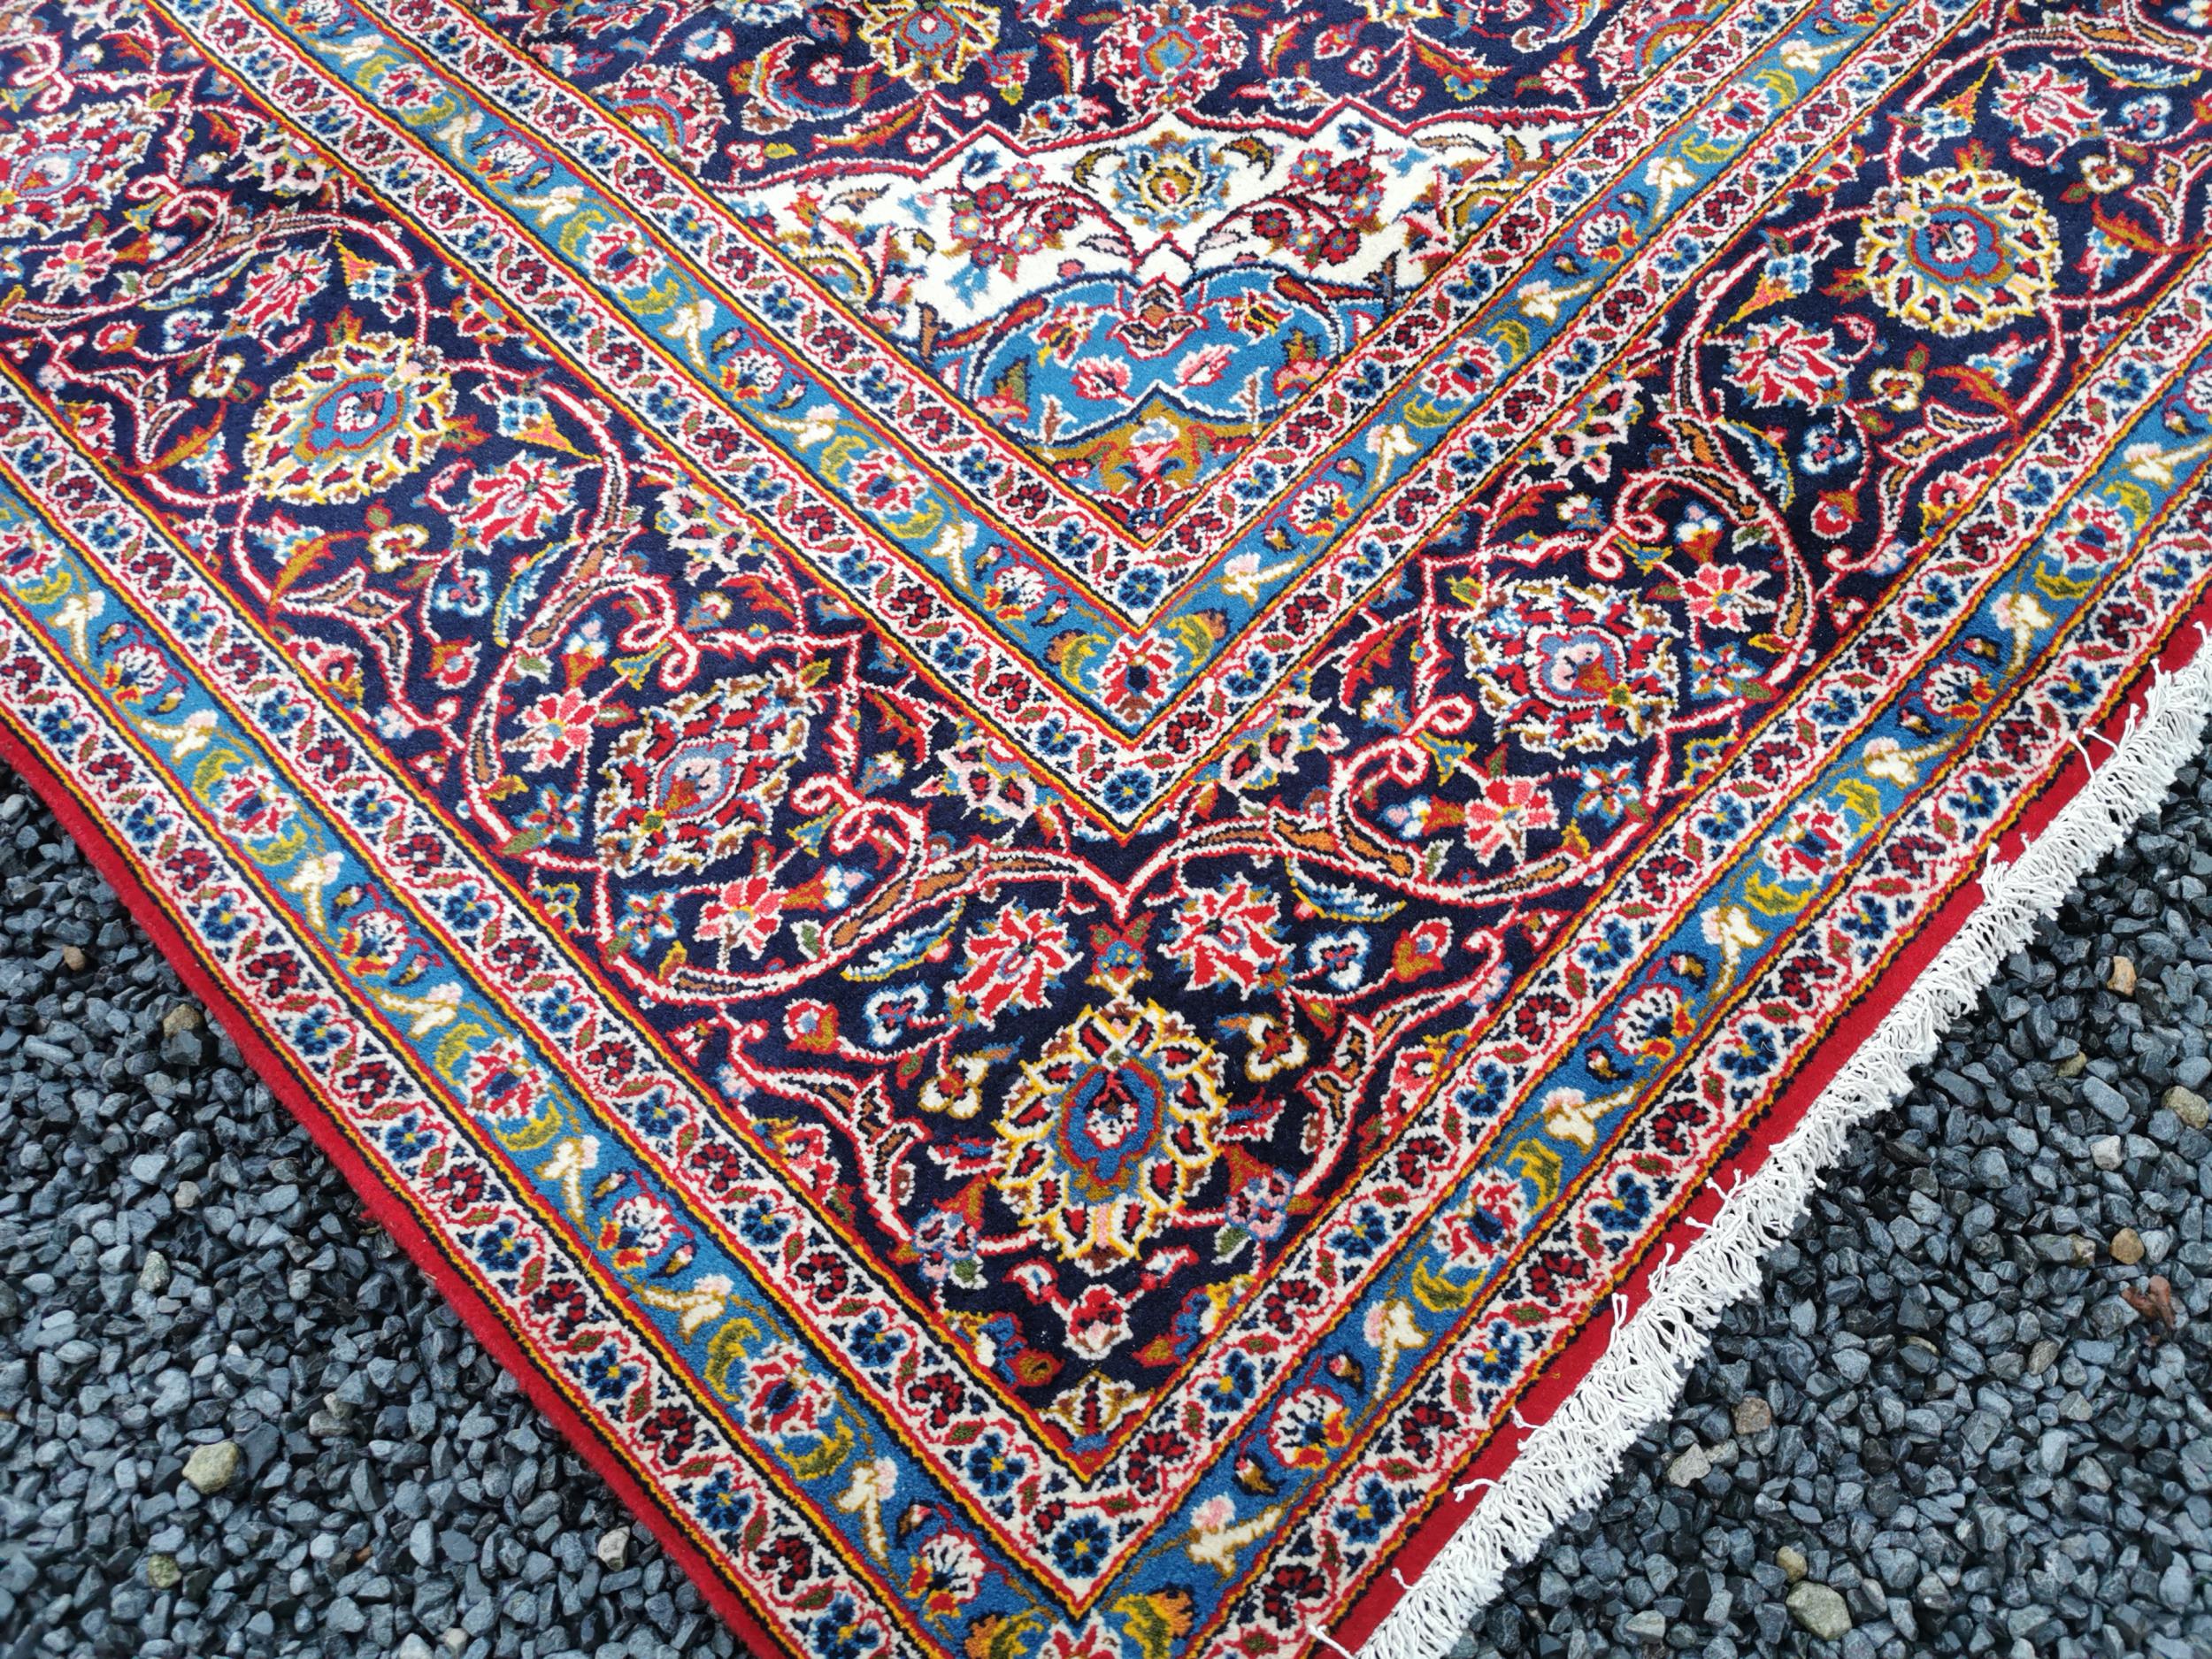 Good quality hand knotted Persian carpet square {342 cm L x 243 cm W}. - Image 3 of 7